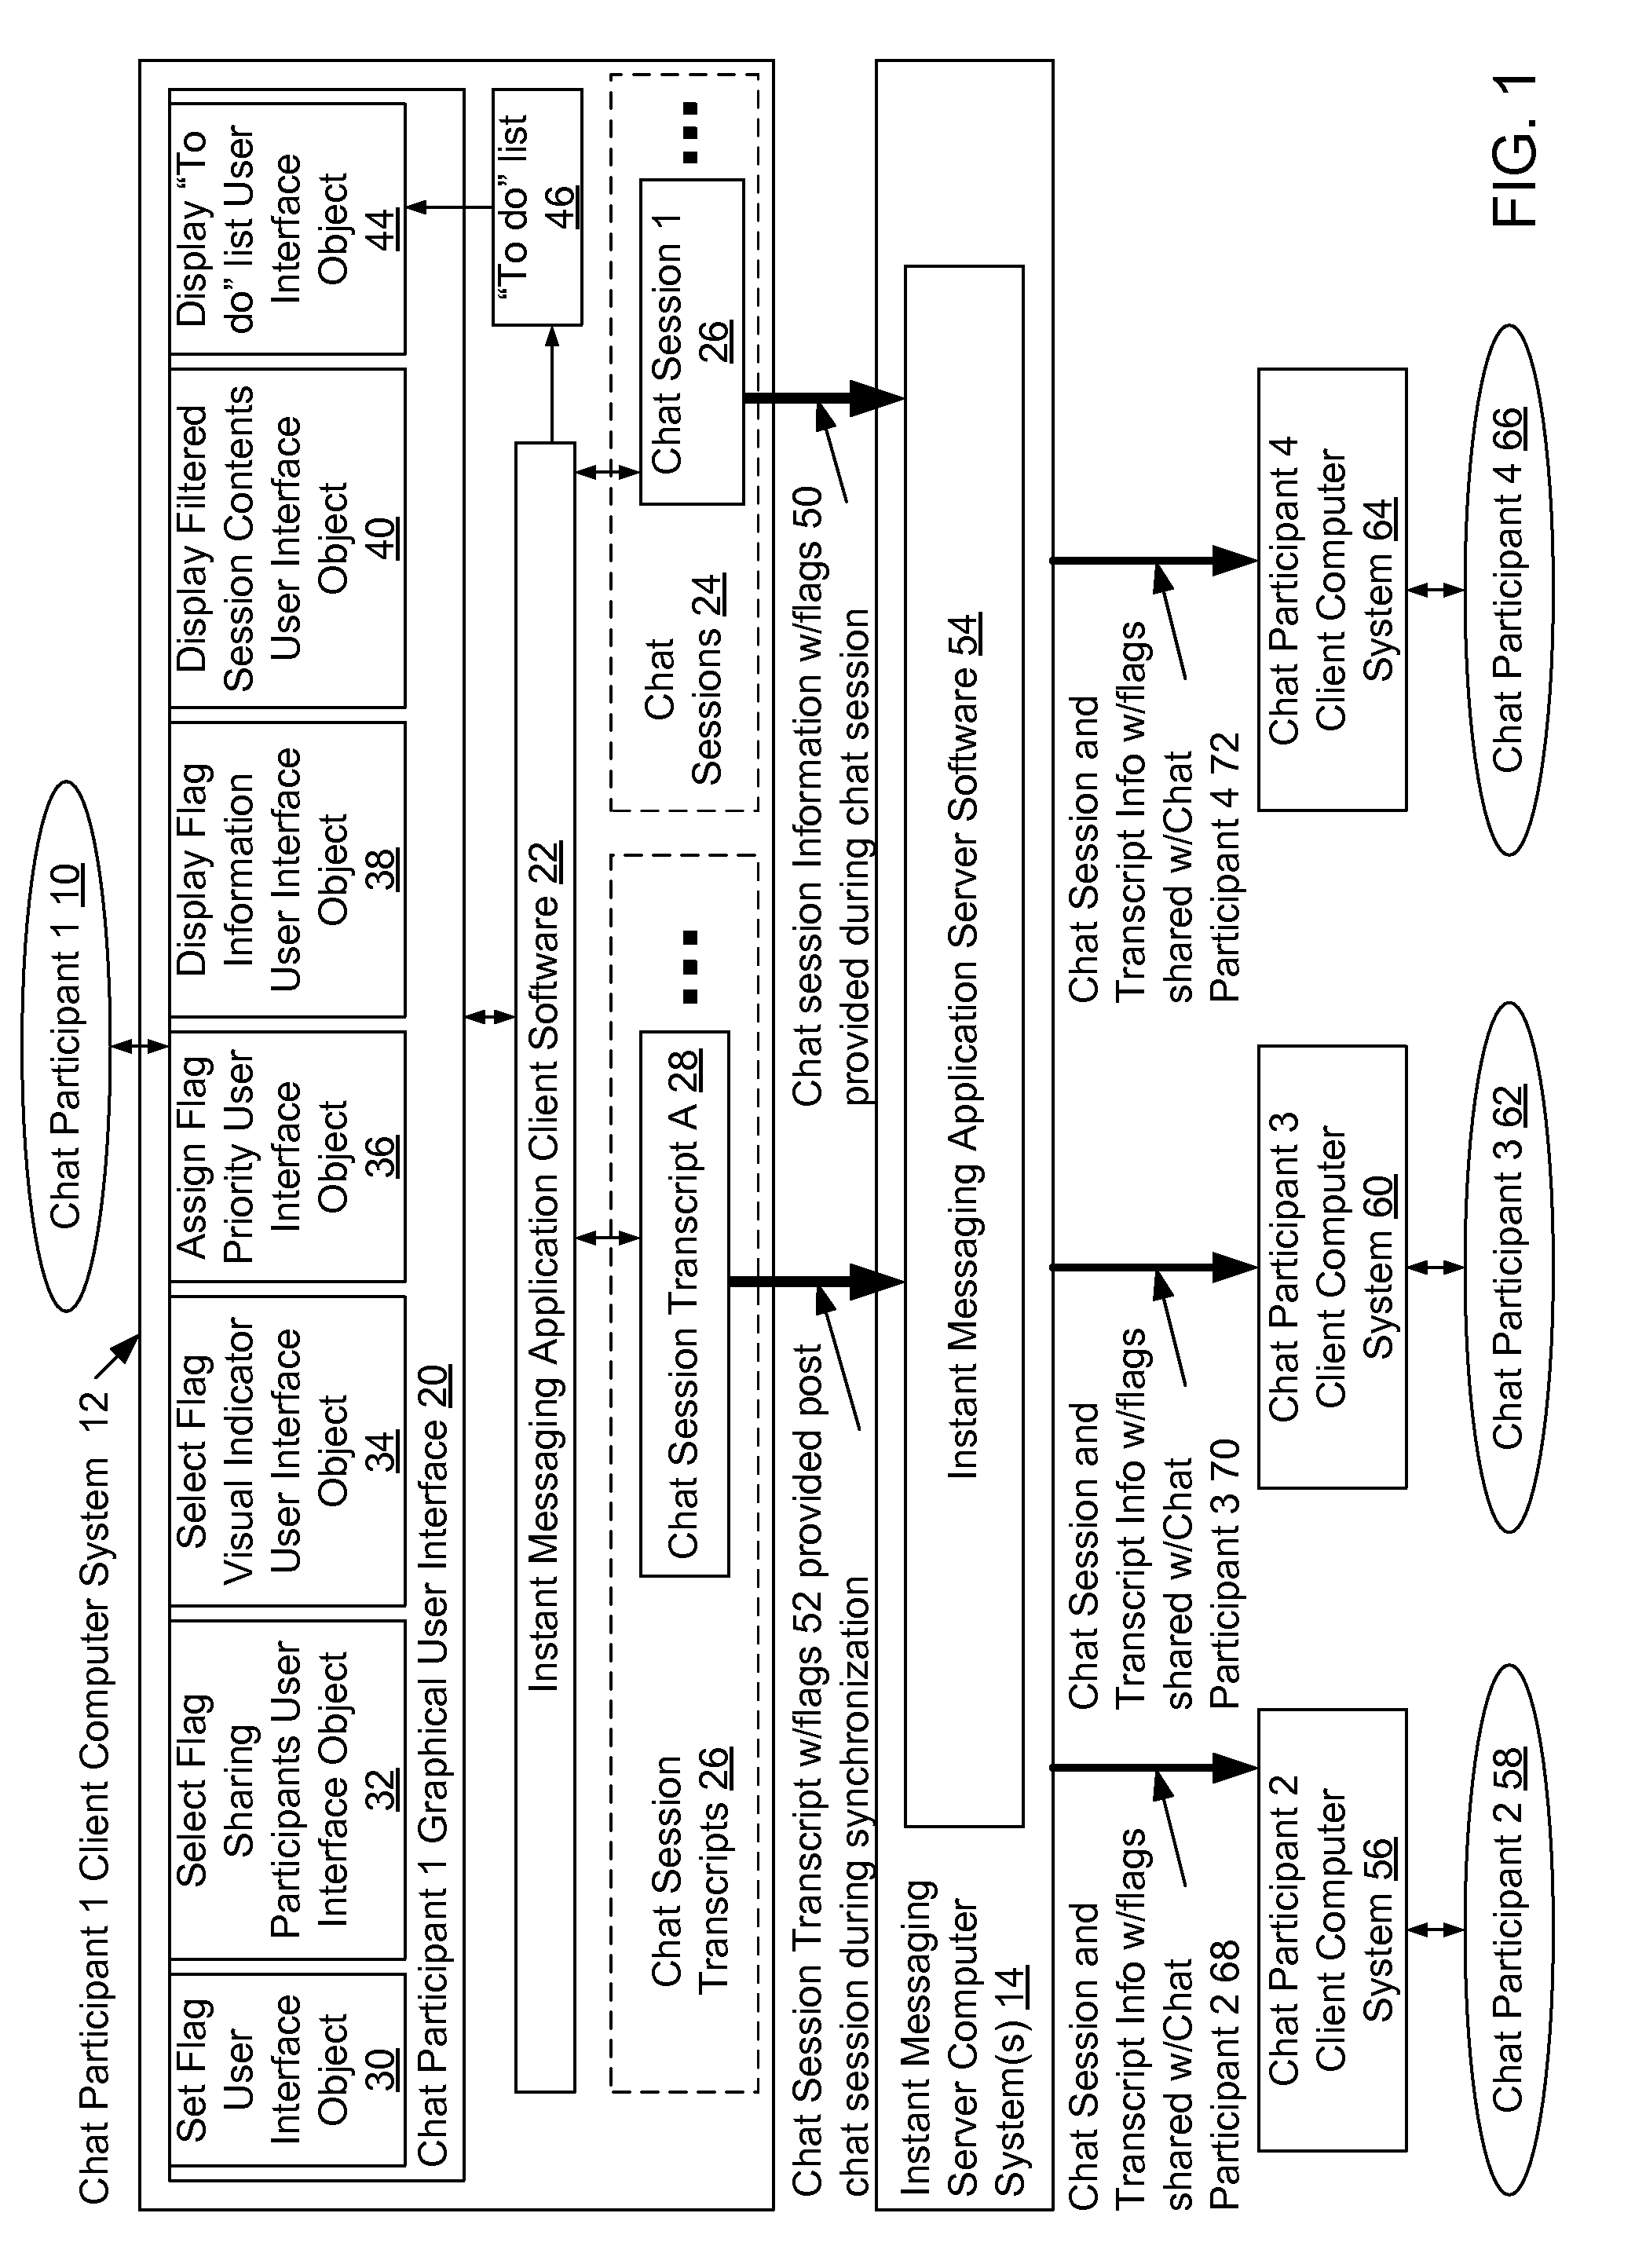 Method and system for selective sharing of flagged information in a group chat environment